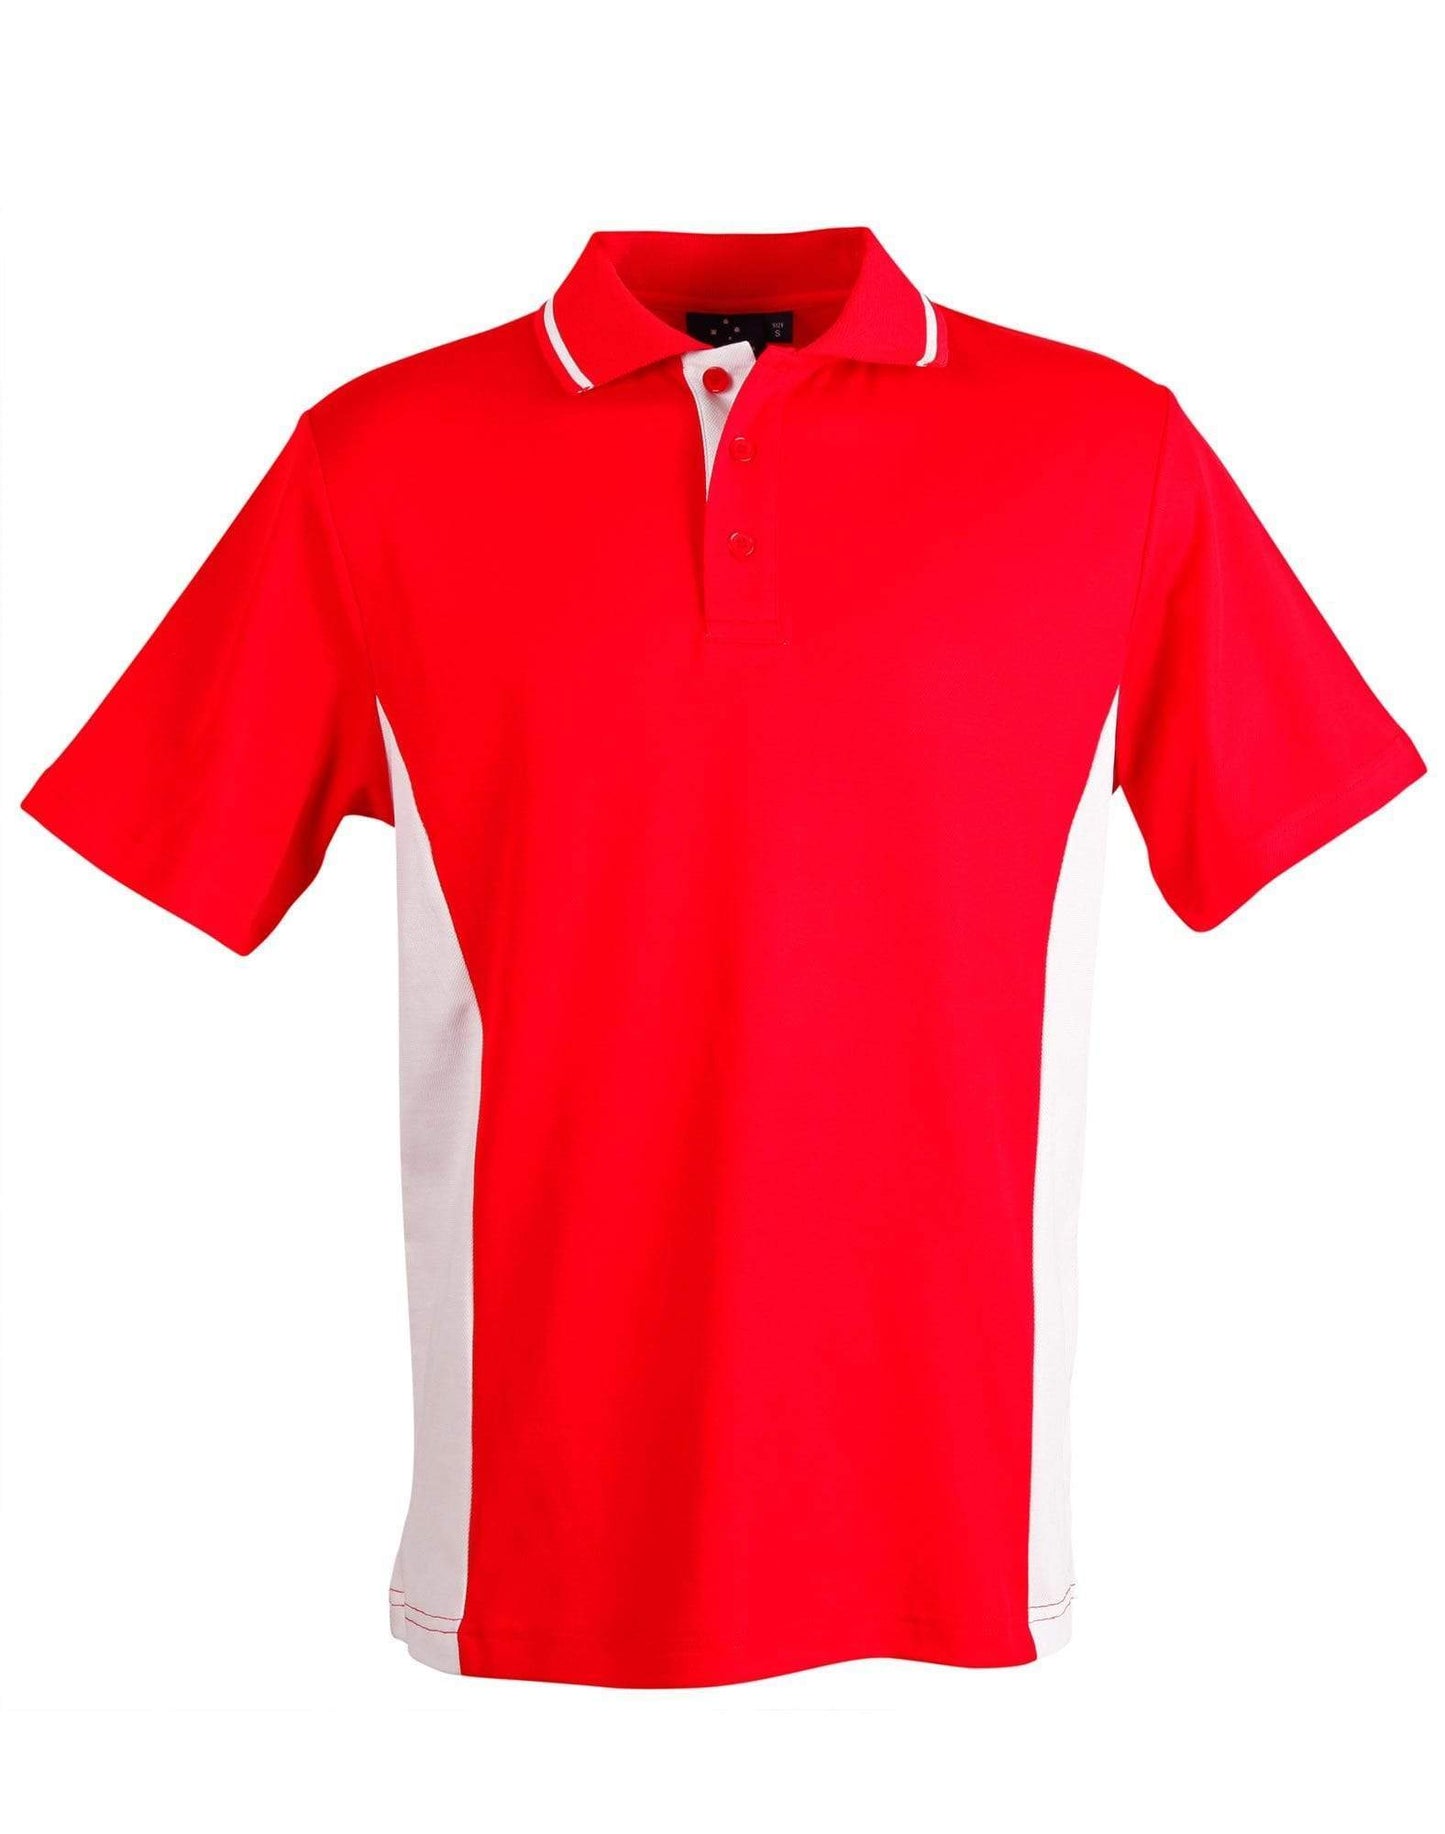 Winning Spirit Casual Wear Red/ White / S Teammate Polo Men's Ps73